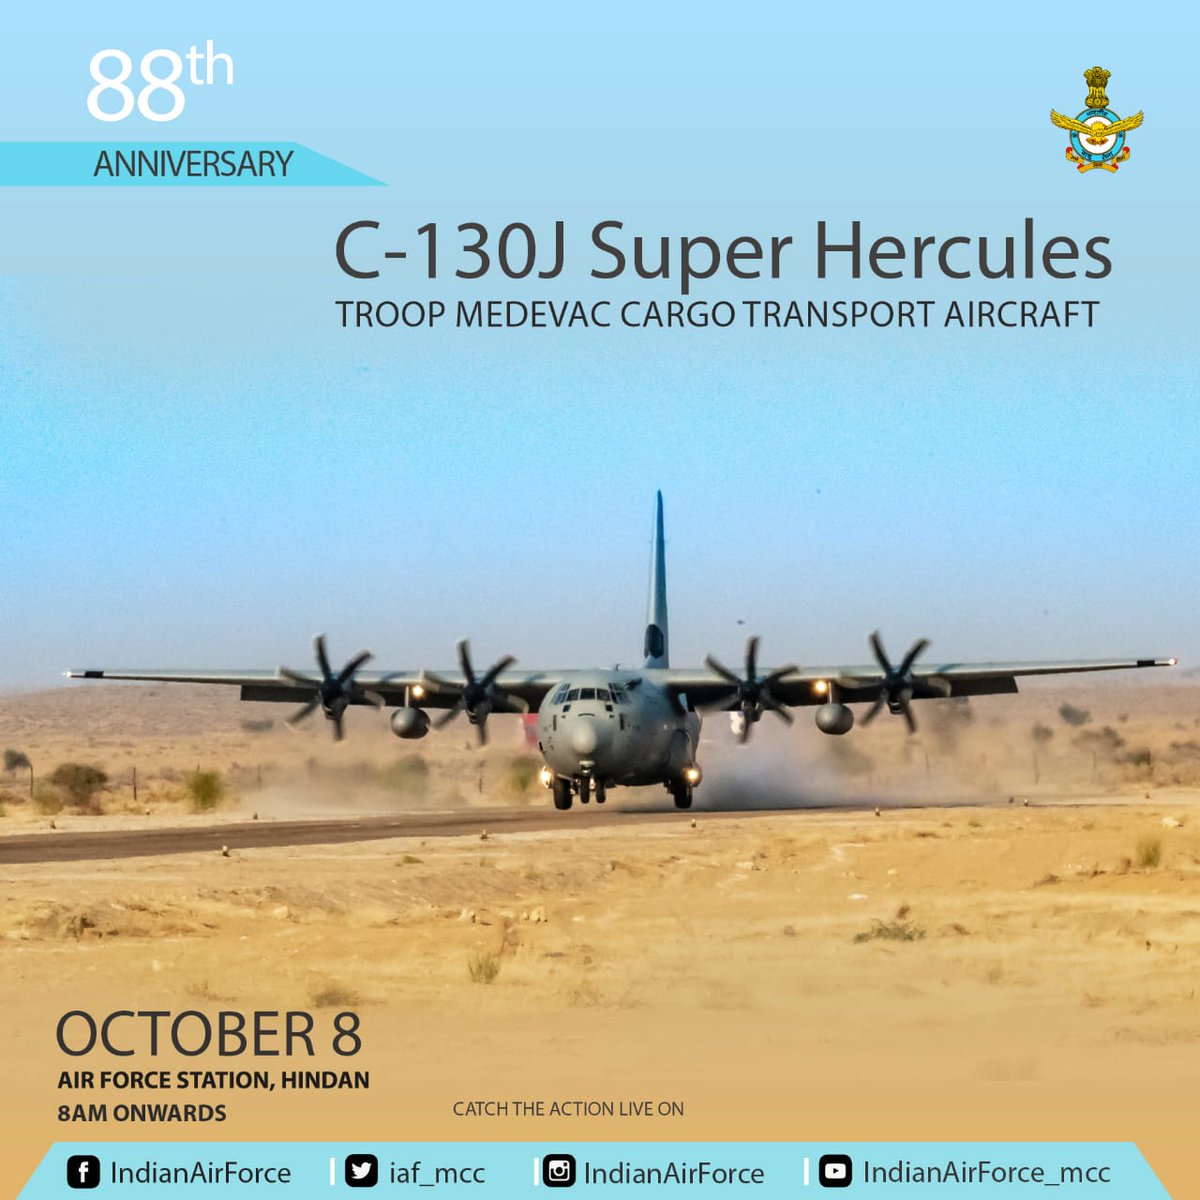 #AFDay2020: C-130J “Super Hercules” - The C-130J is a four-engine turboprop military transport aircraft.
IAF has integrated this machine for Special Ops, HADR missions & air maintenance roles.

#KnowTheIAF
#IndianAirForce